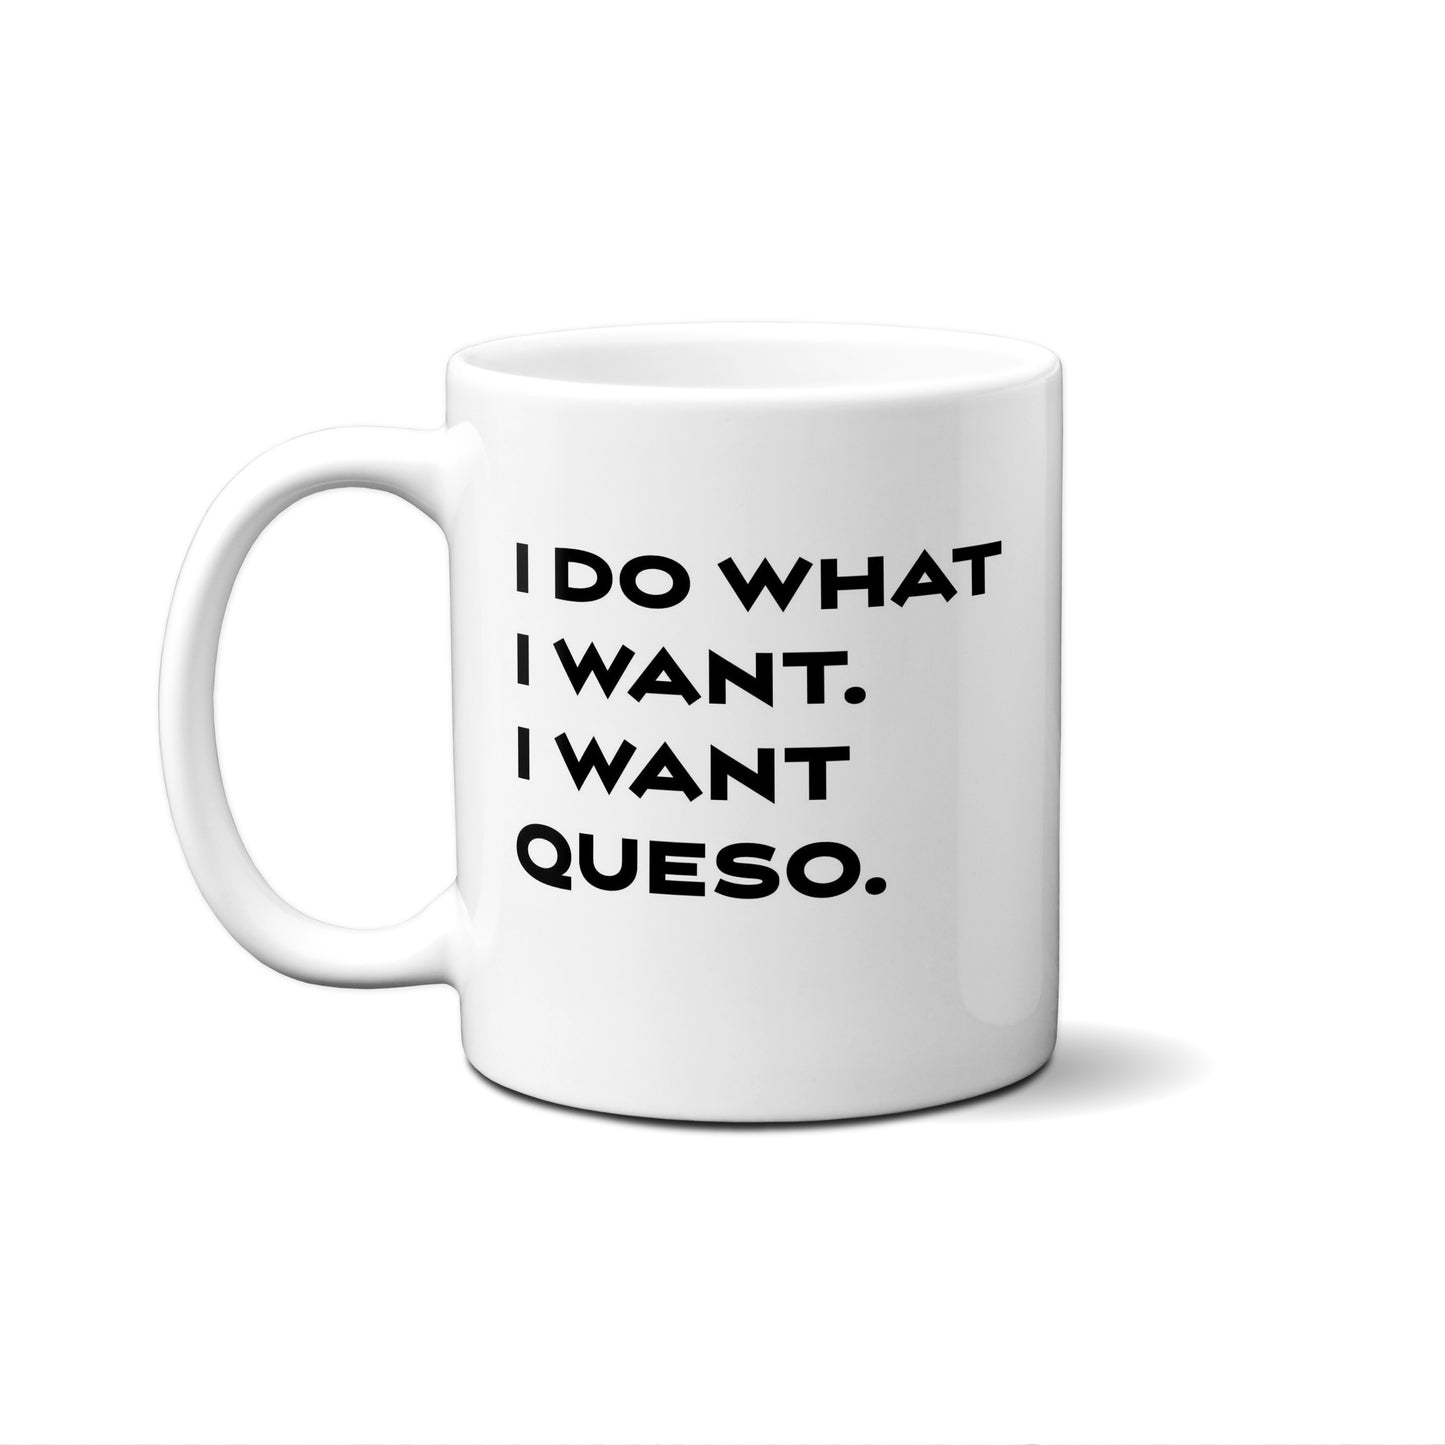 I Do Want I Want. I Want Queso Quote Mug